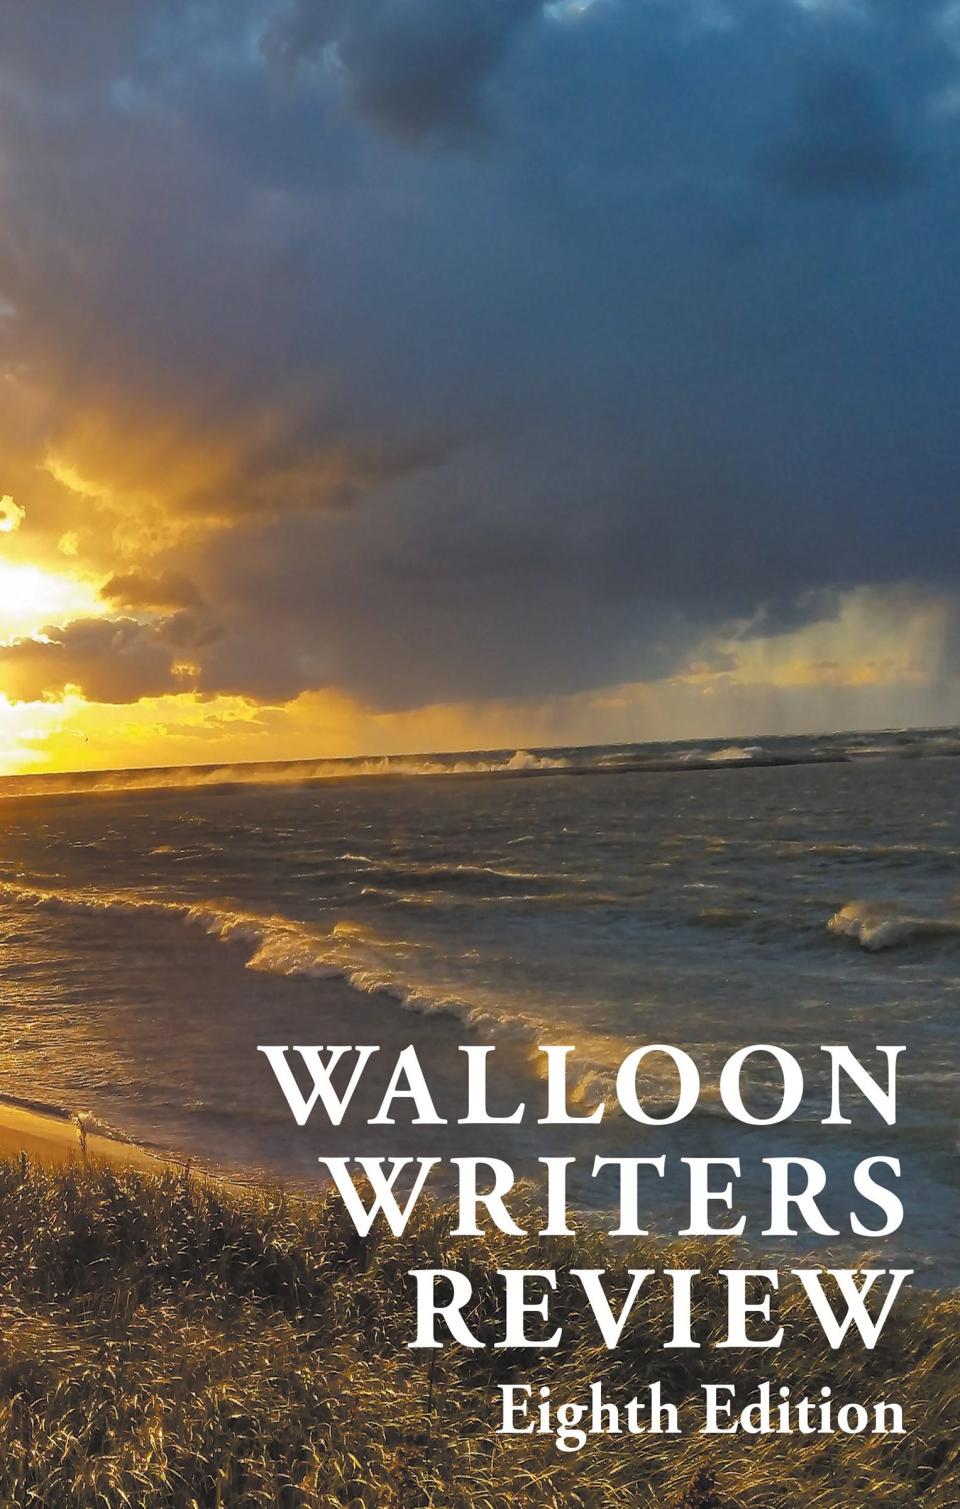 Walloon Writers Review Eighth Edition.